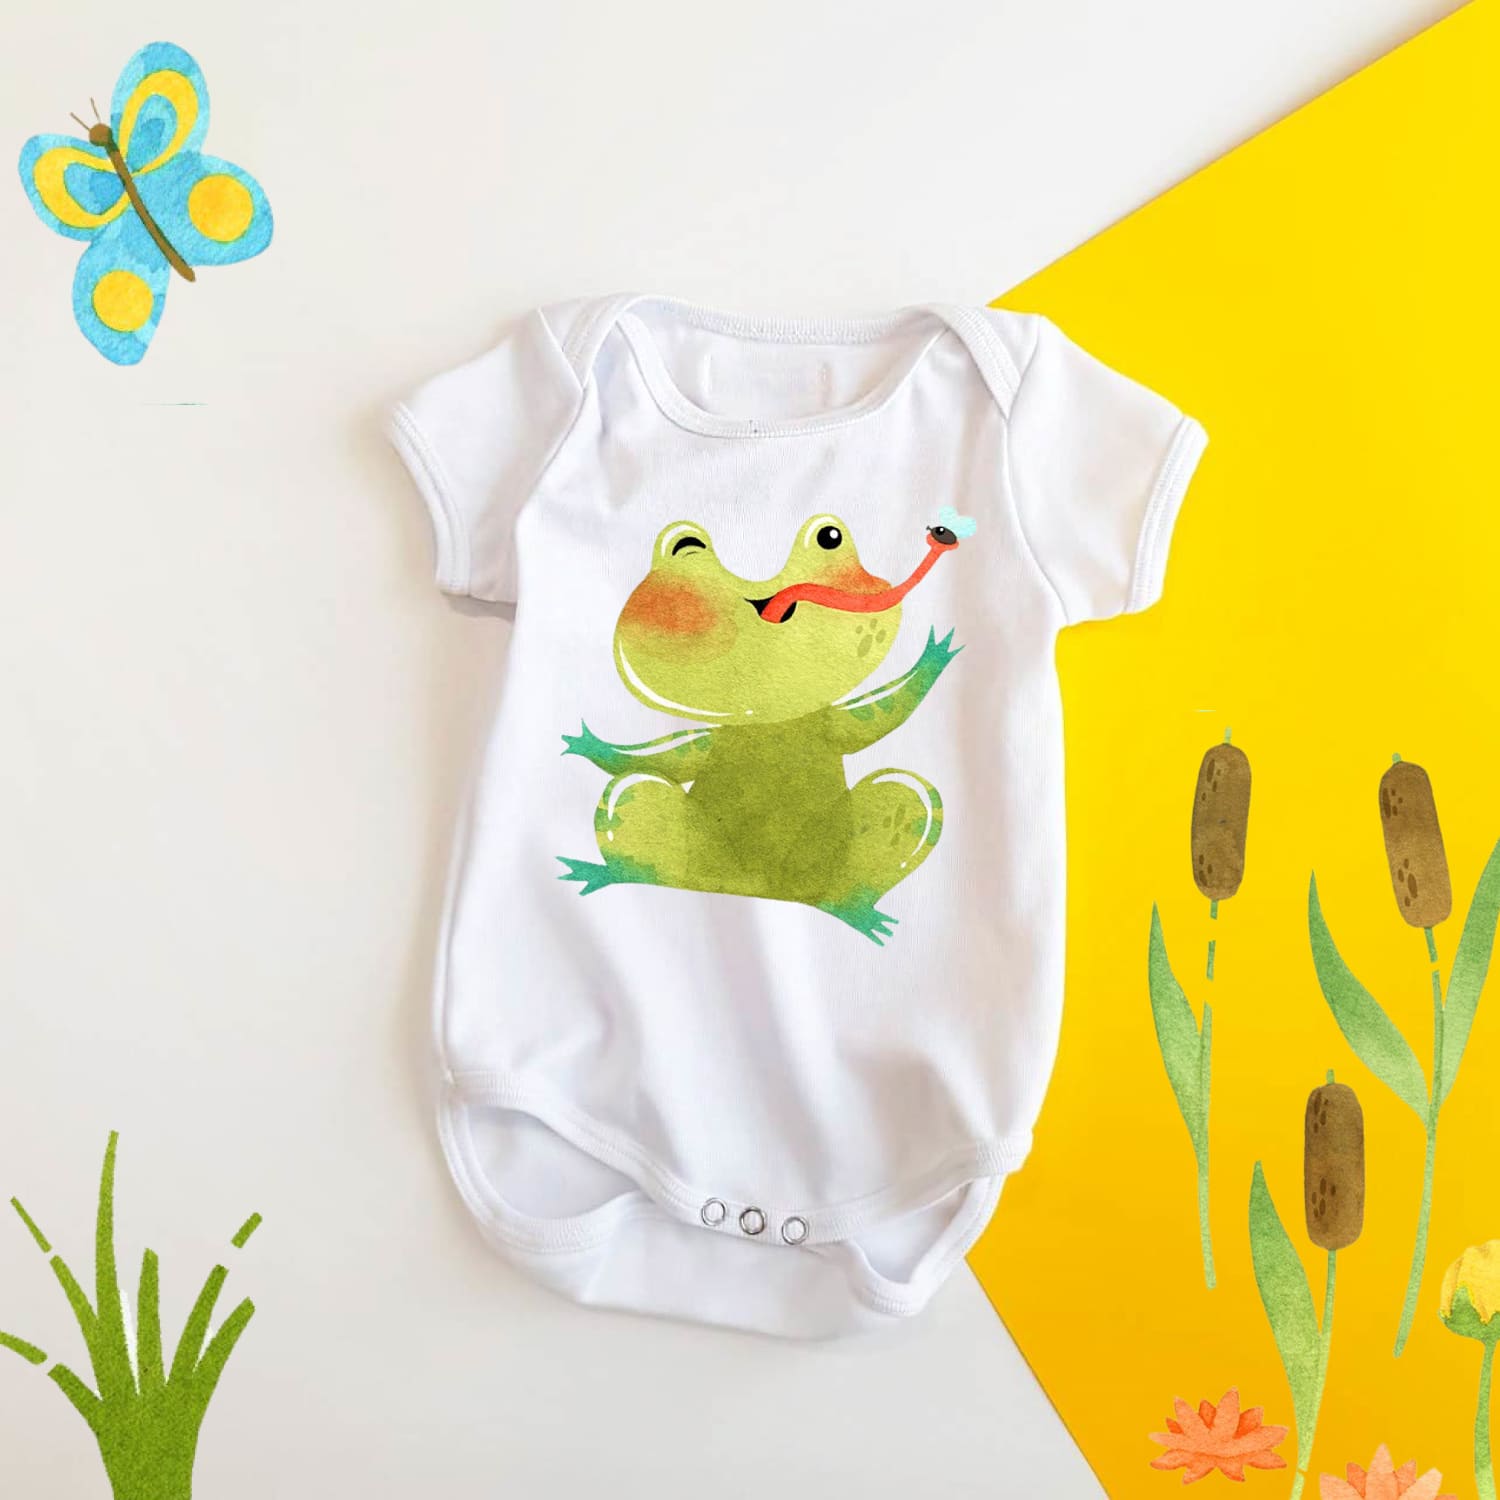 Hand-drawn Watercolor Cheerful Toad, Frog Collection of clipart and seamless patterns with cute toad.